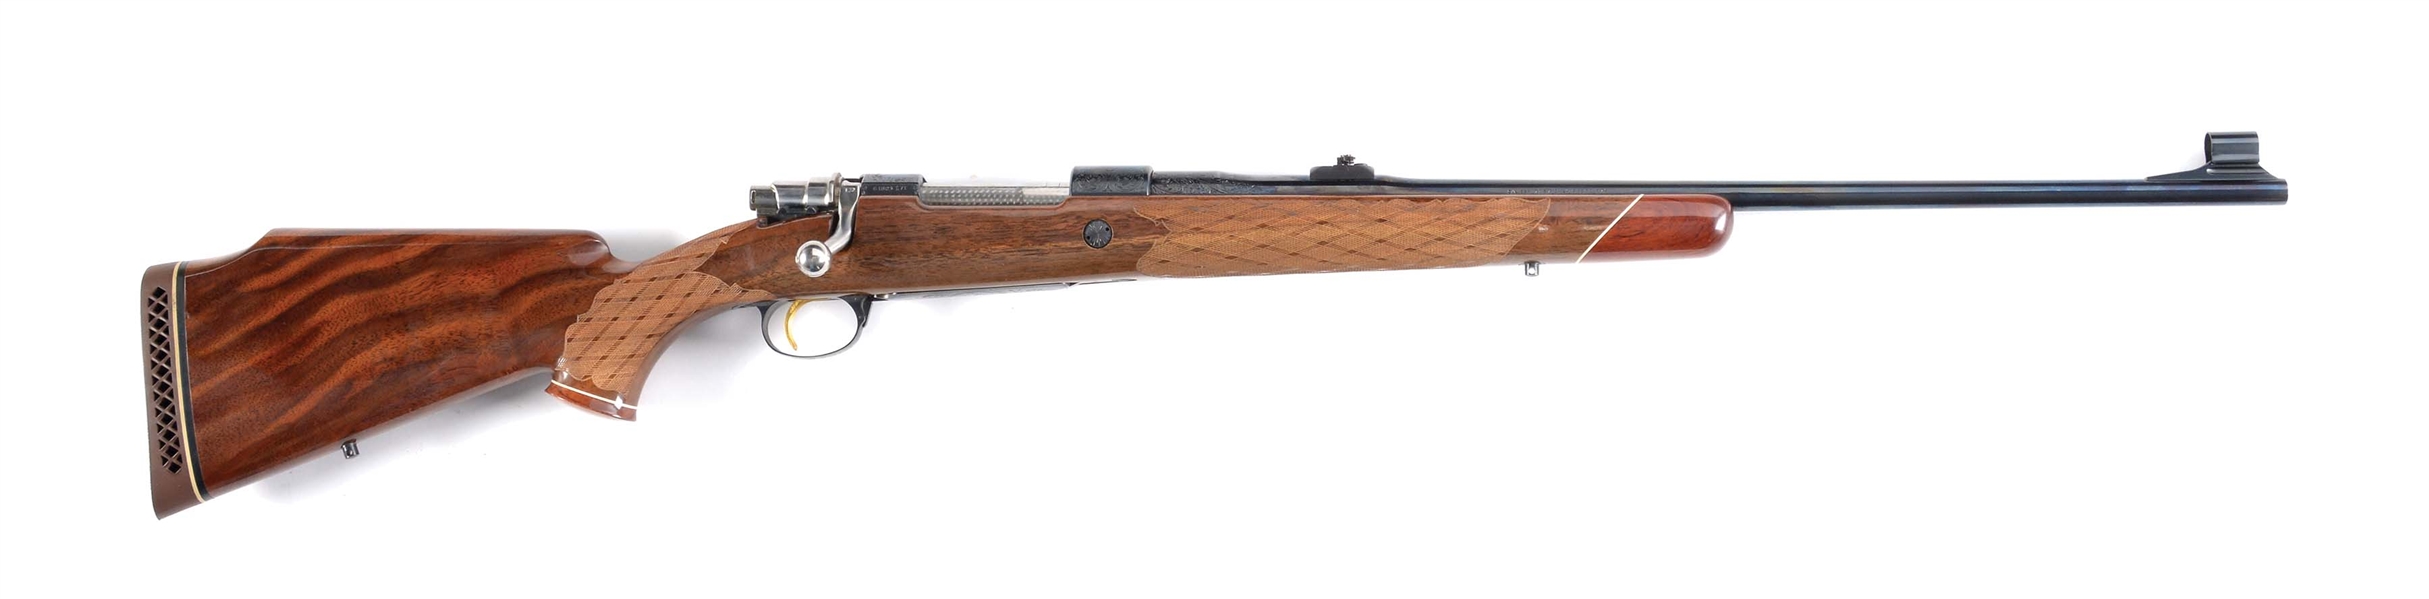 (M) BROWNING FN MEDALLION 7MM MAUSER BOLT ACTION RIFLE